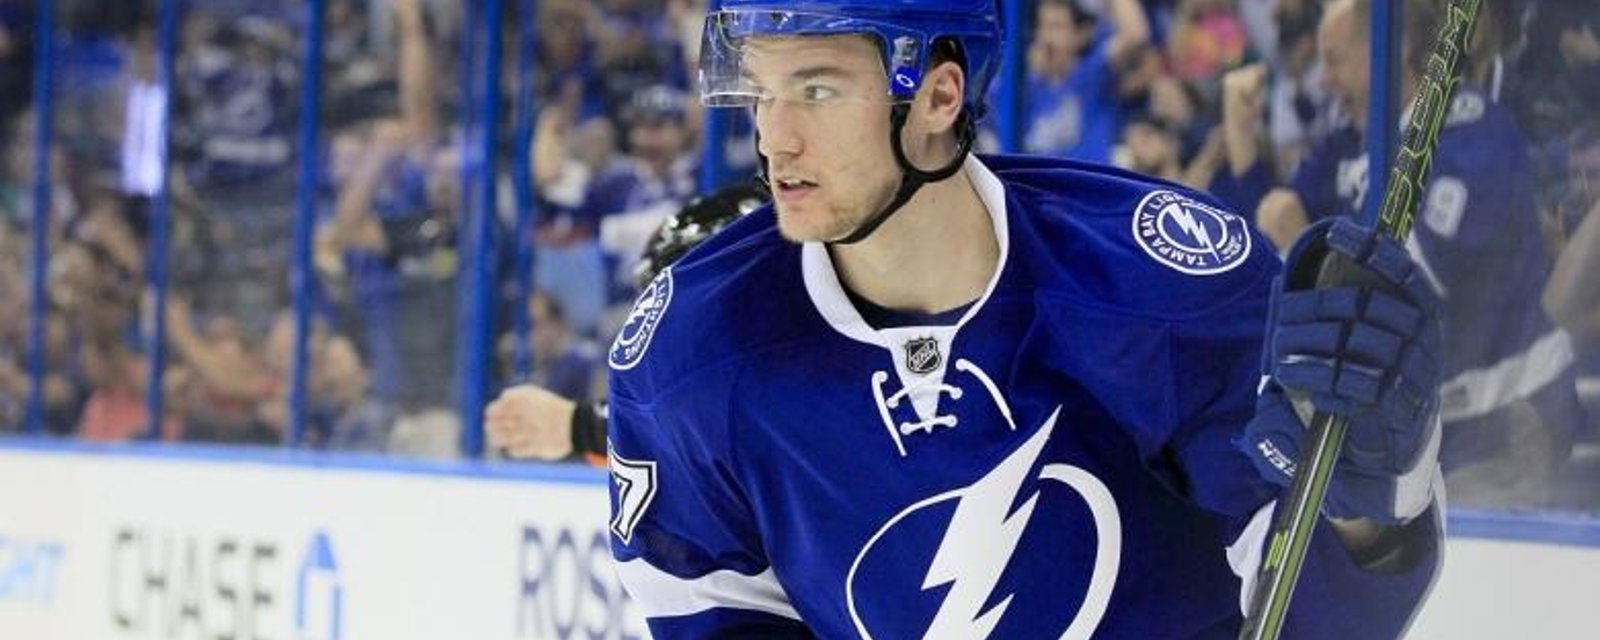 One hopeful team may be flat out of luck when it comes to acquiring Jonathan Drouin.